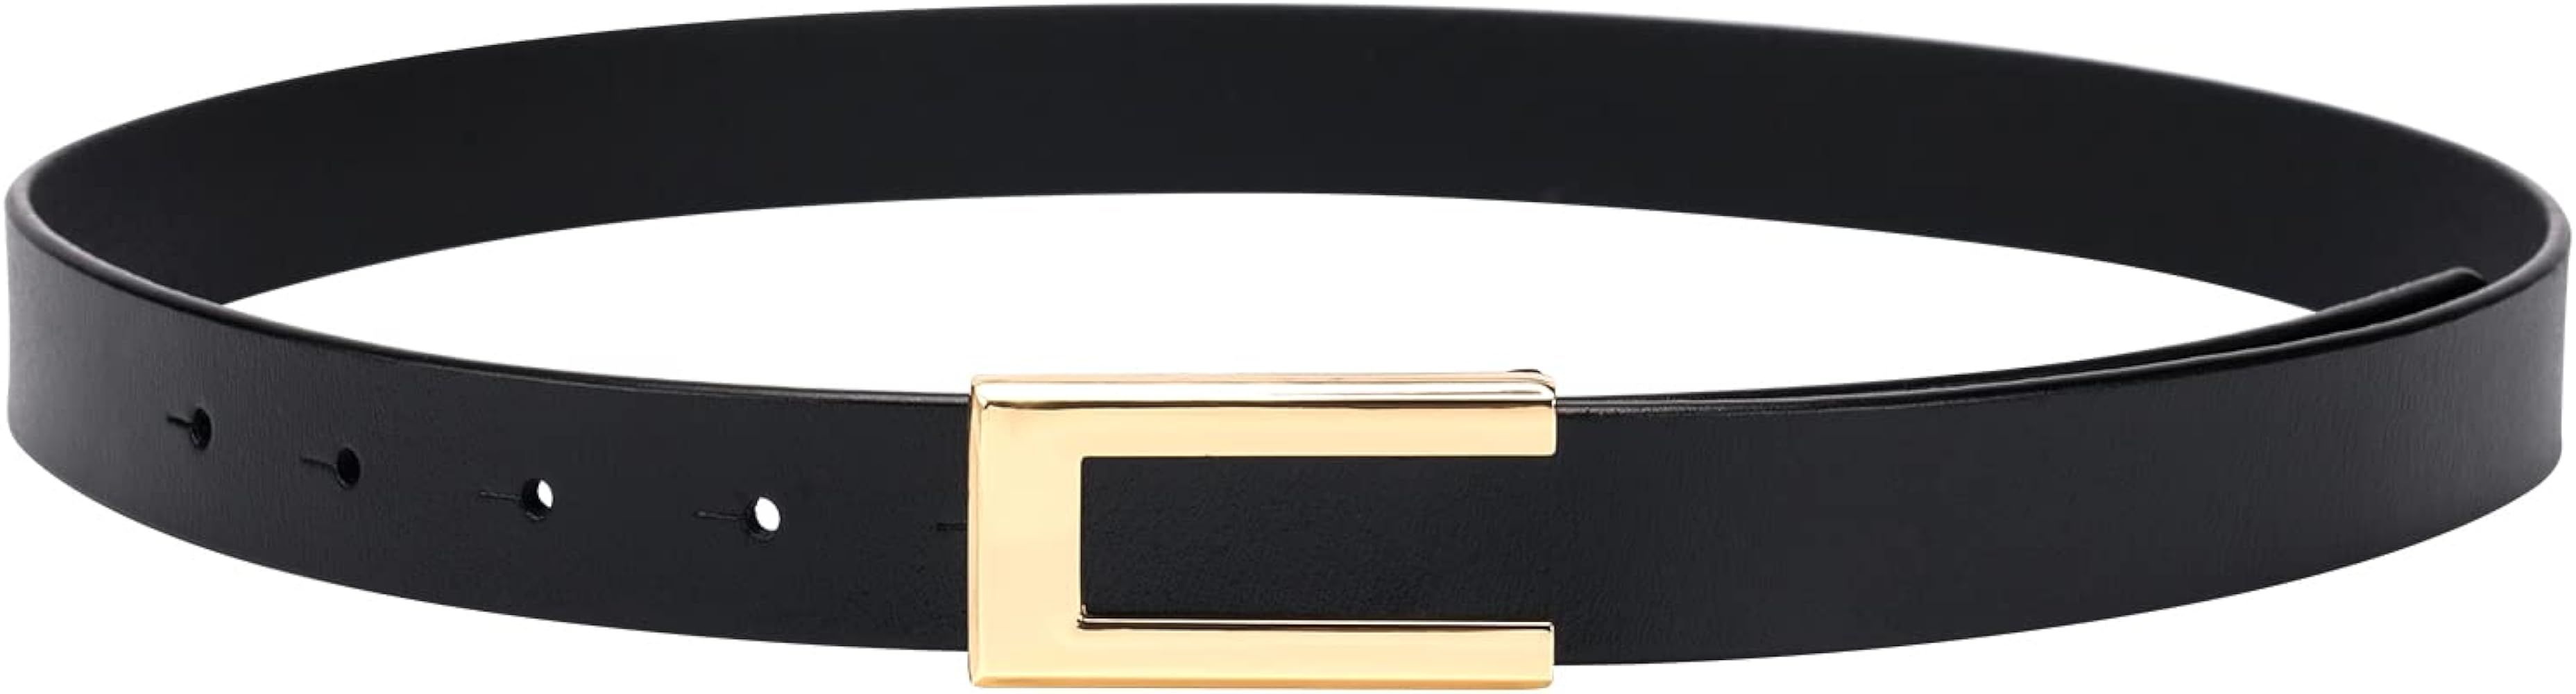 Womens Leather Belt Skinny Waist Belt for Dresses Jeans Pants with Gold Buckle | Amazon (US)